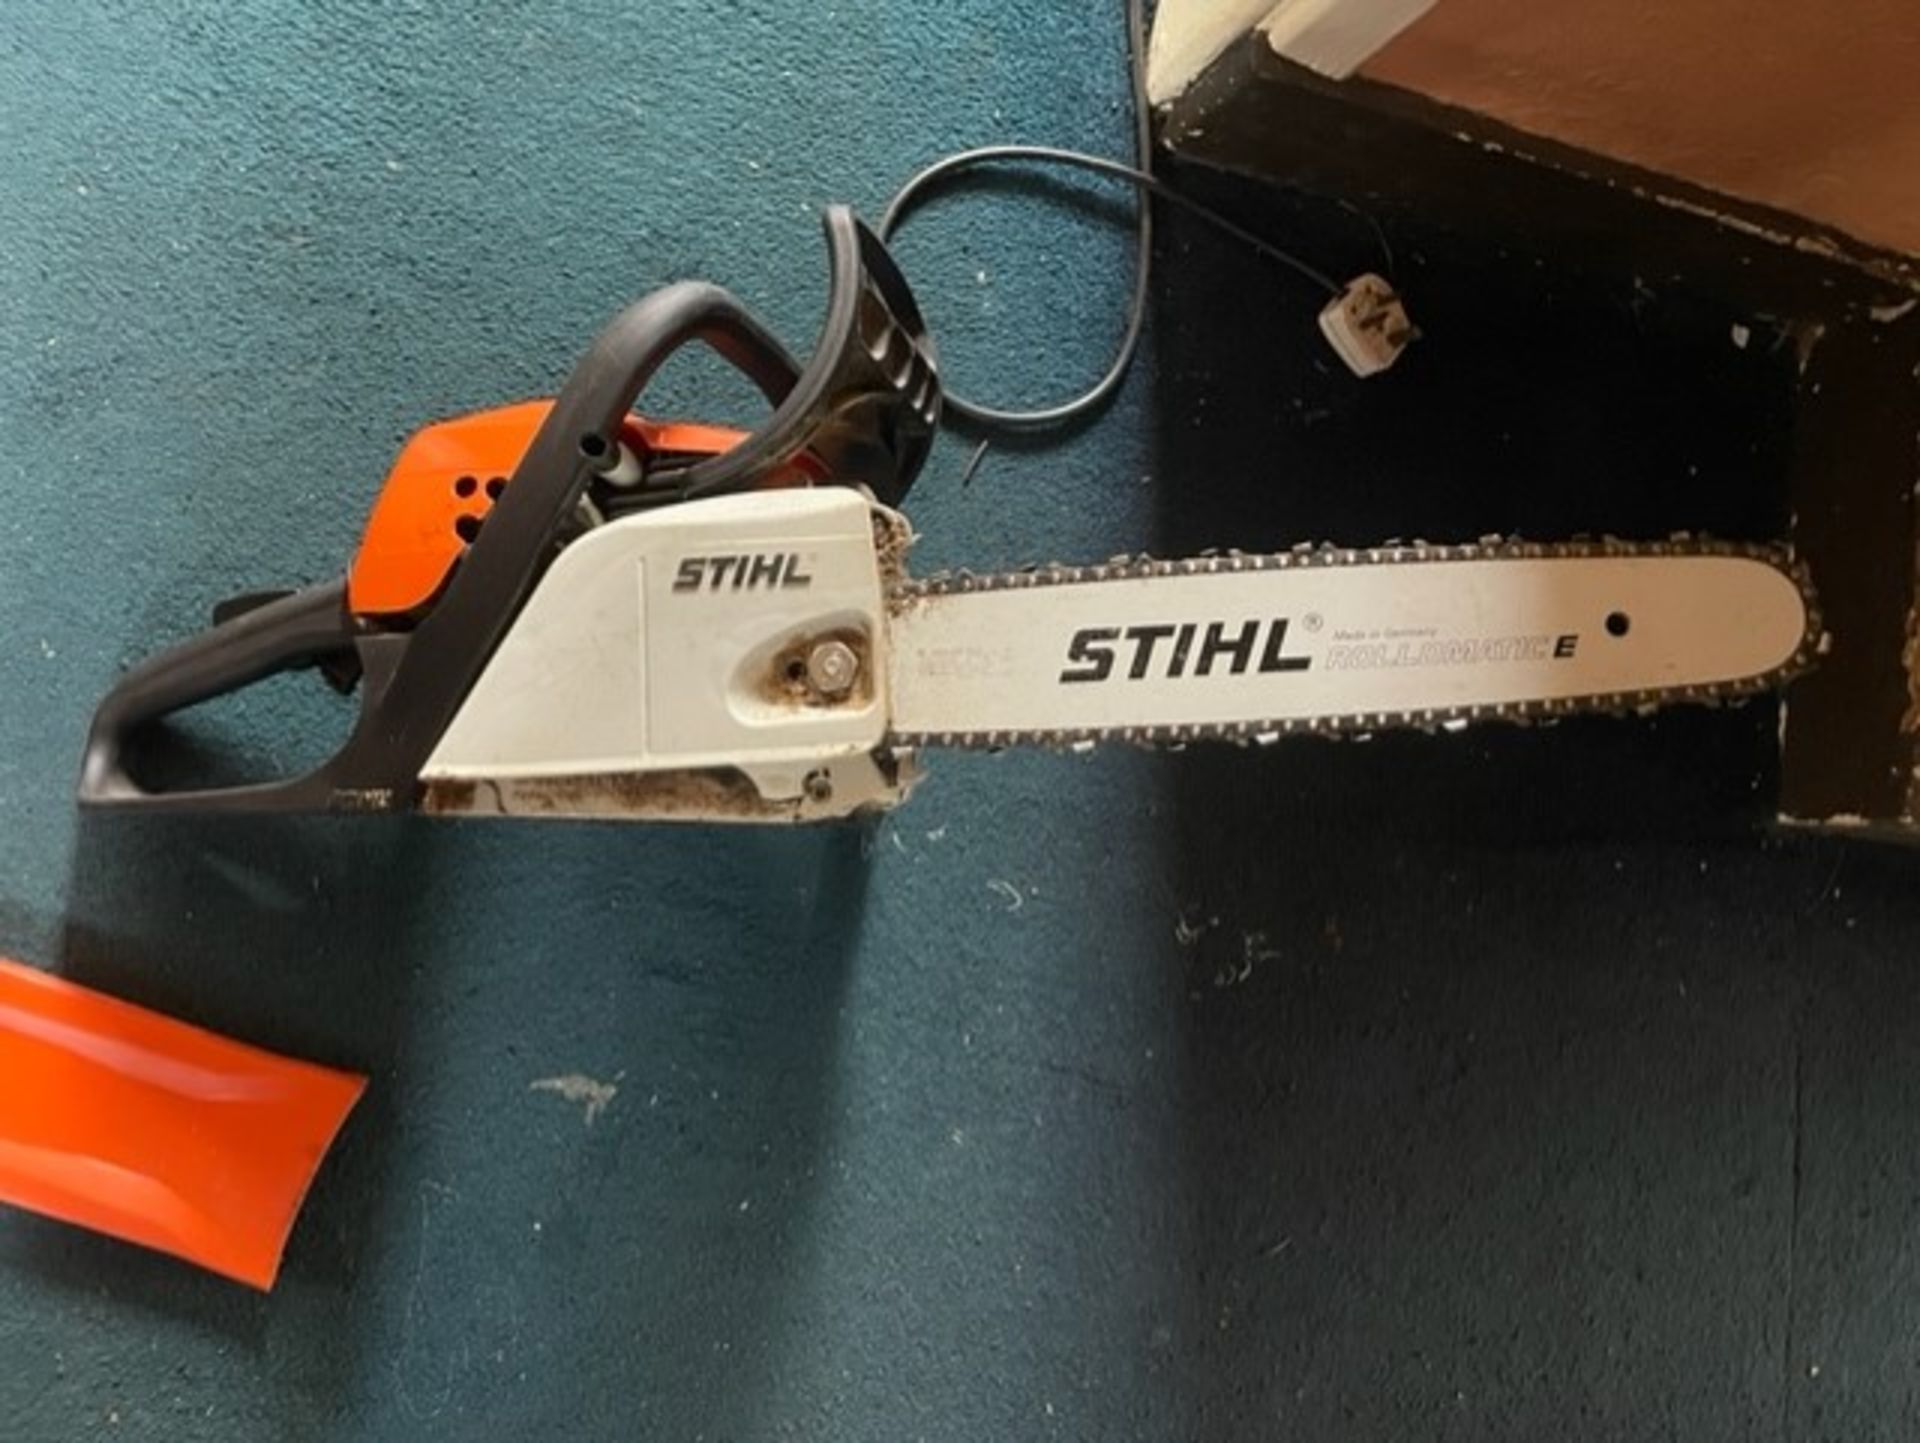 Stihl 181 used only once to cut a branch damaged shoulder forces sale but this machine has doing - Bild 3 aus 3